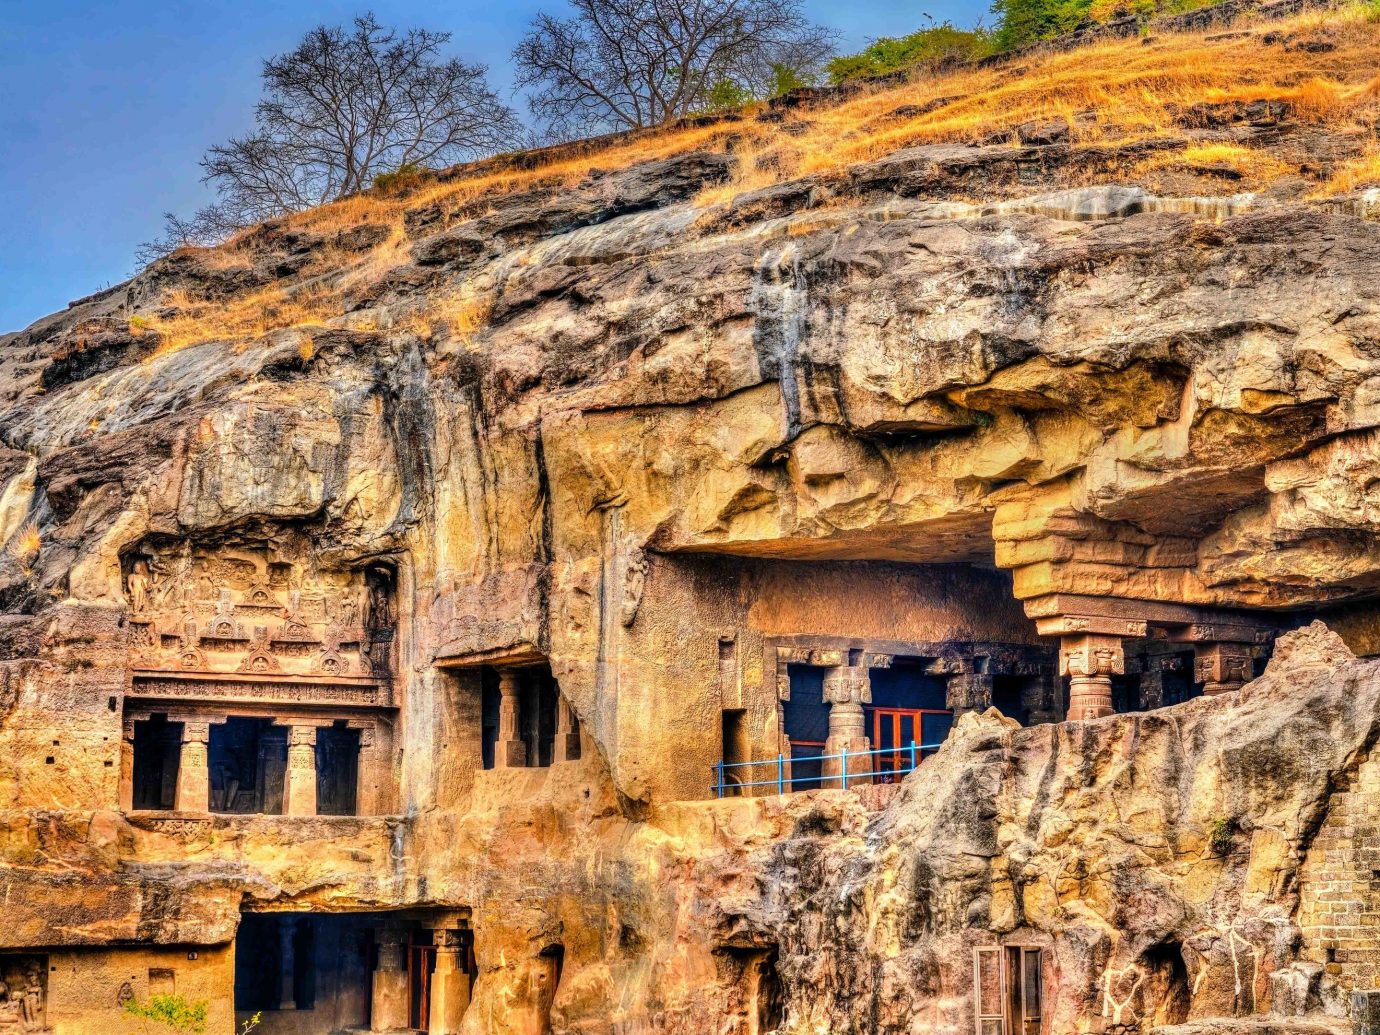 India historic site archaeological site Ruins rock bedrock outcrop formation ancient history escarpment unesco world heritage site badlands geology sky sill facade cliff